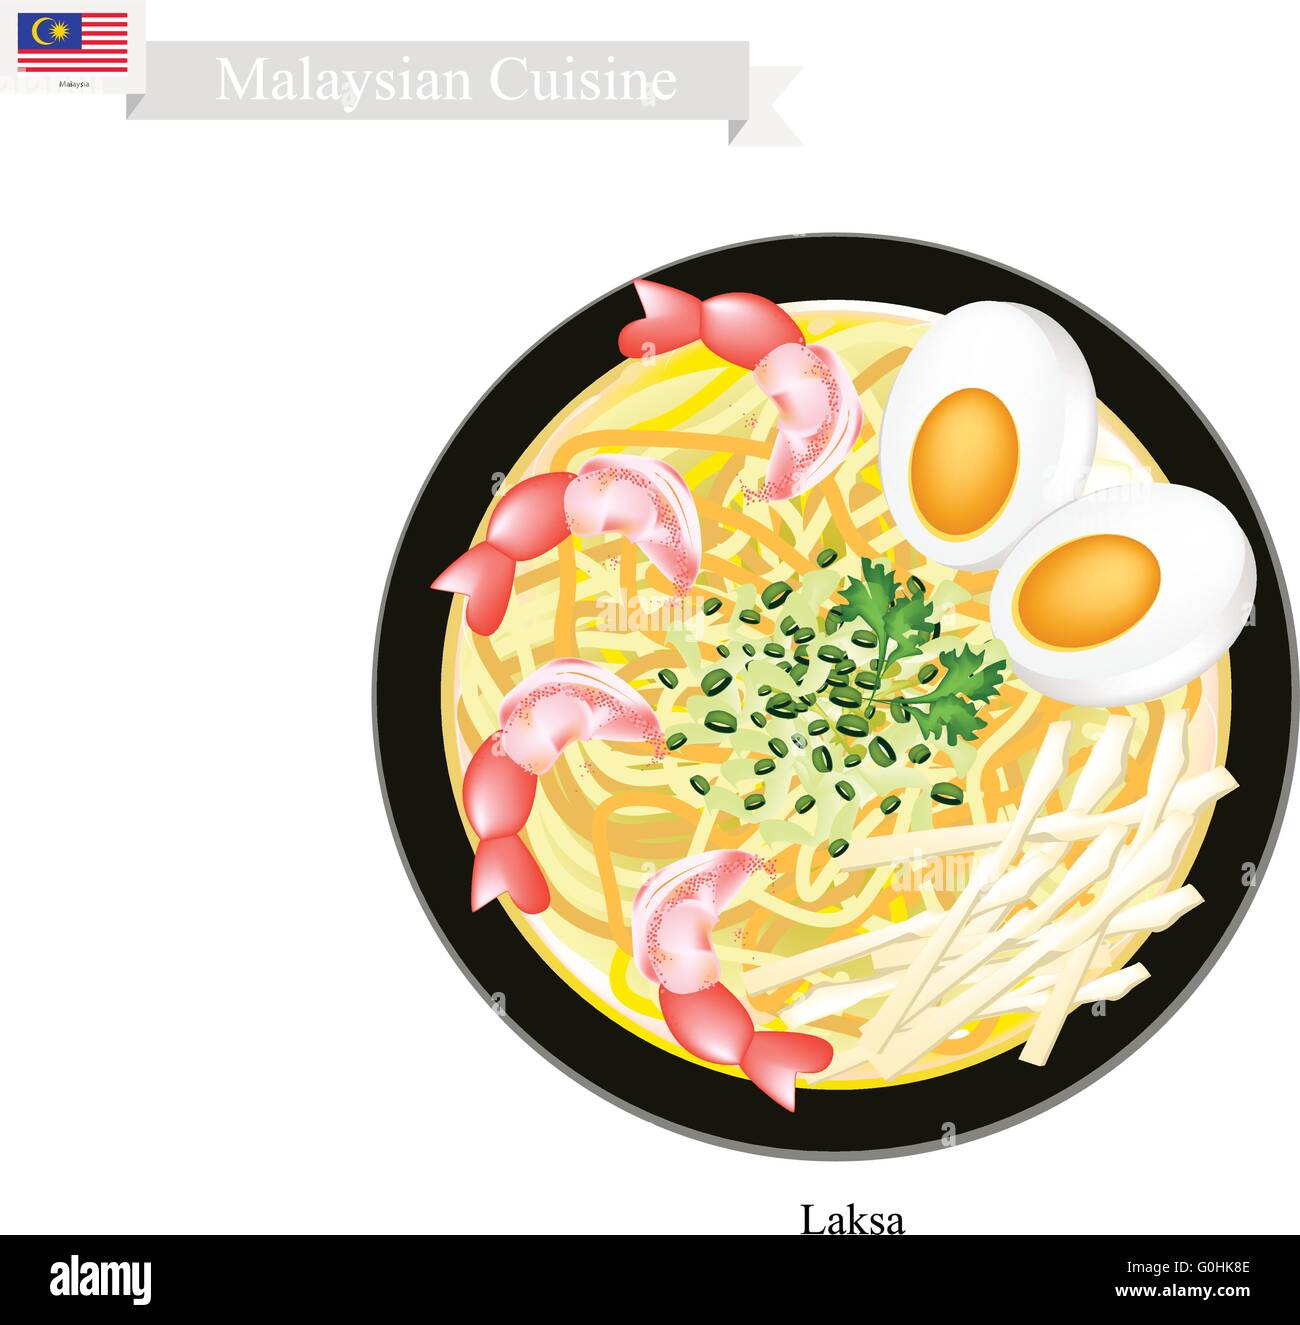 Malaysian Cuisine, Laksa or Traditional Rice Noodle Served in Spicy Curry Soup. One of The Most Popular Dish in Malaysia. Stock Vector